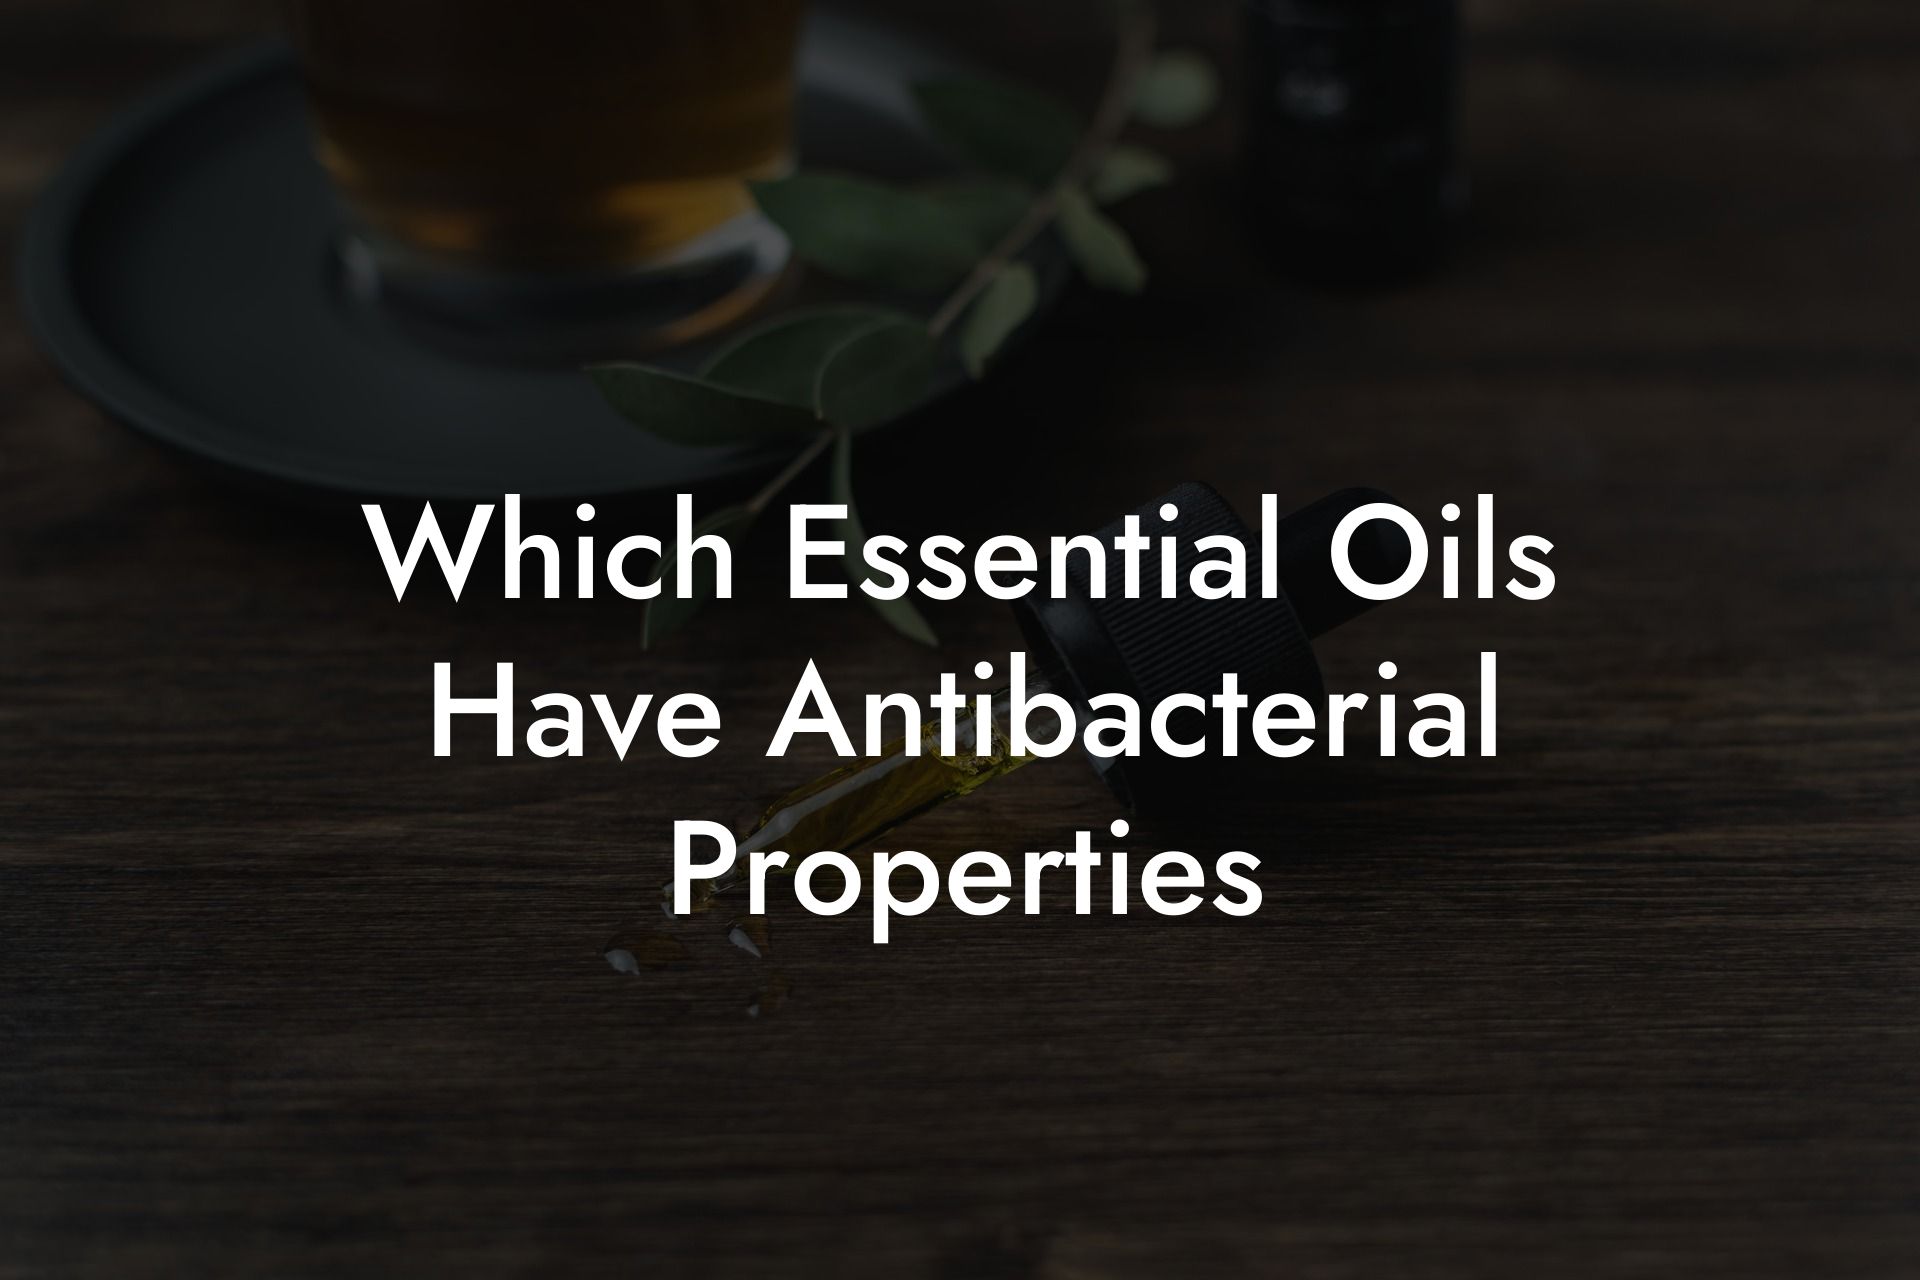 Which Essential Oils Have Antibacterial Properties